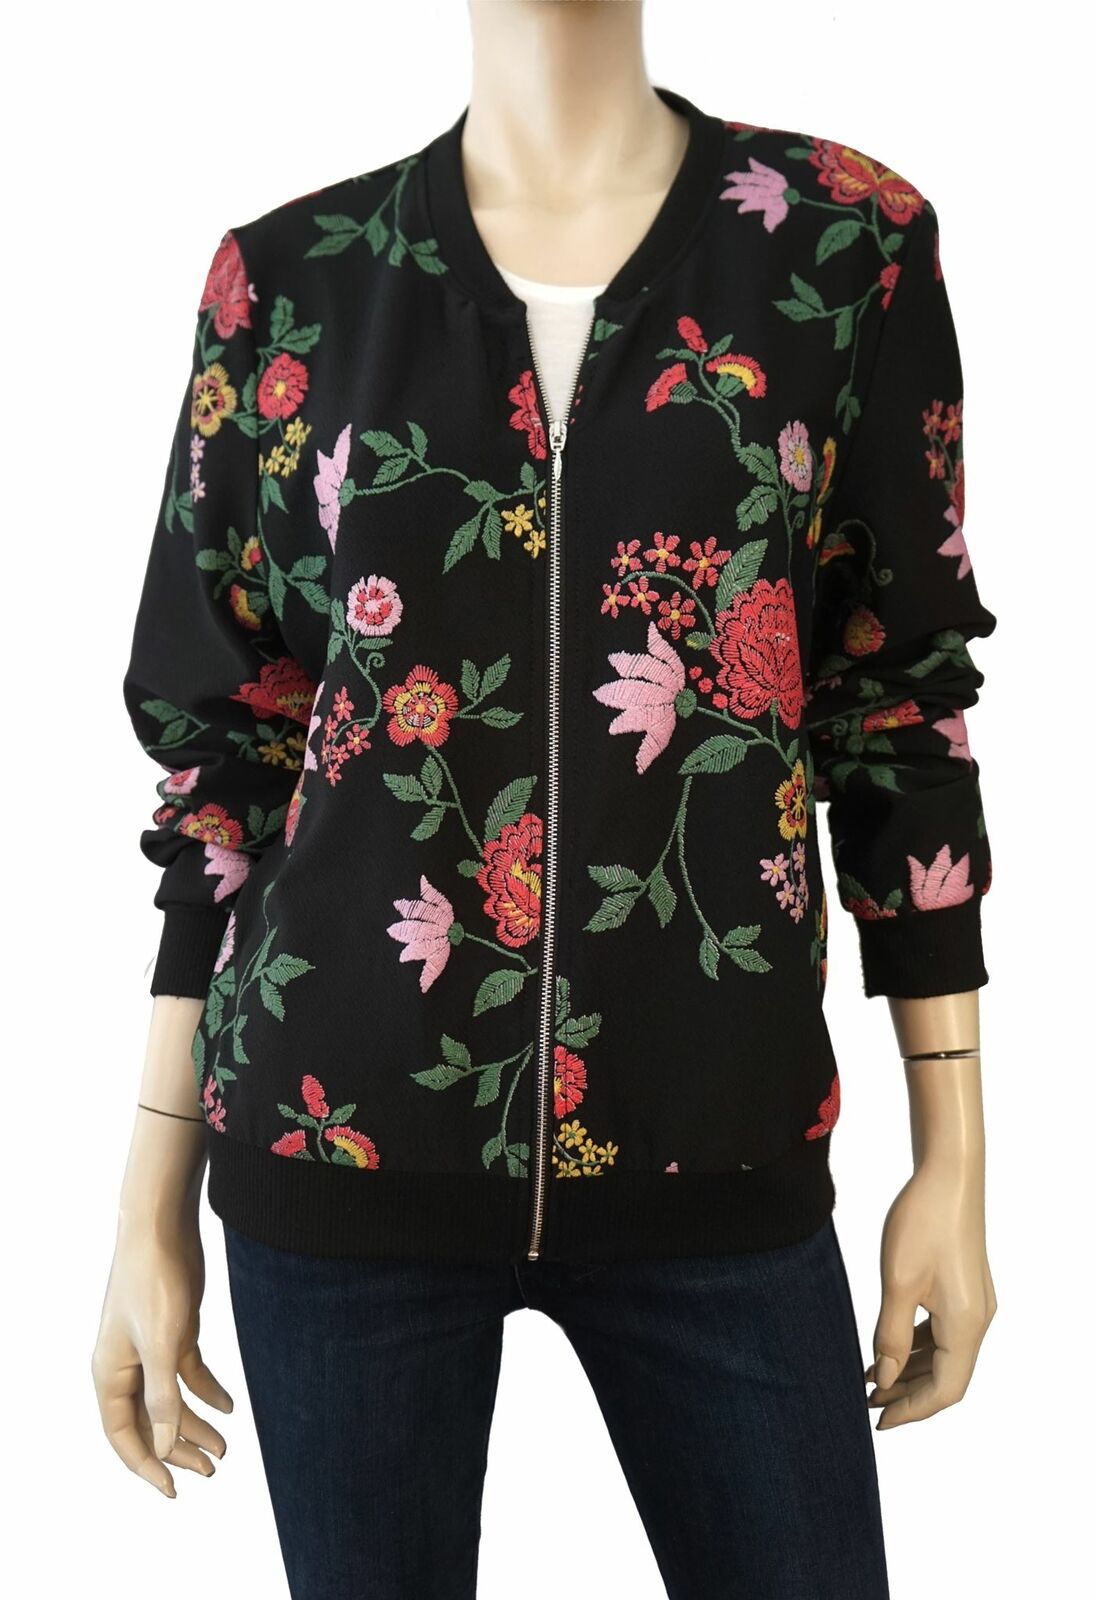 ZOE by MICHAEL PHILLIPS Woven Black Floral Bomber… - image 1